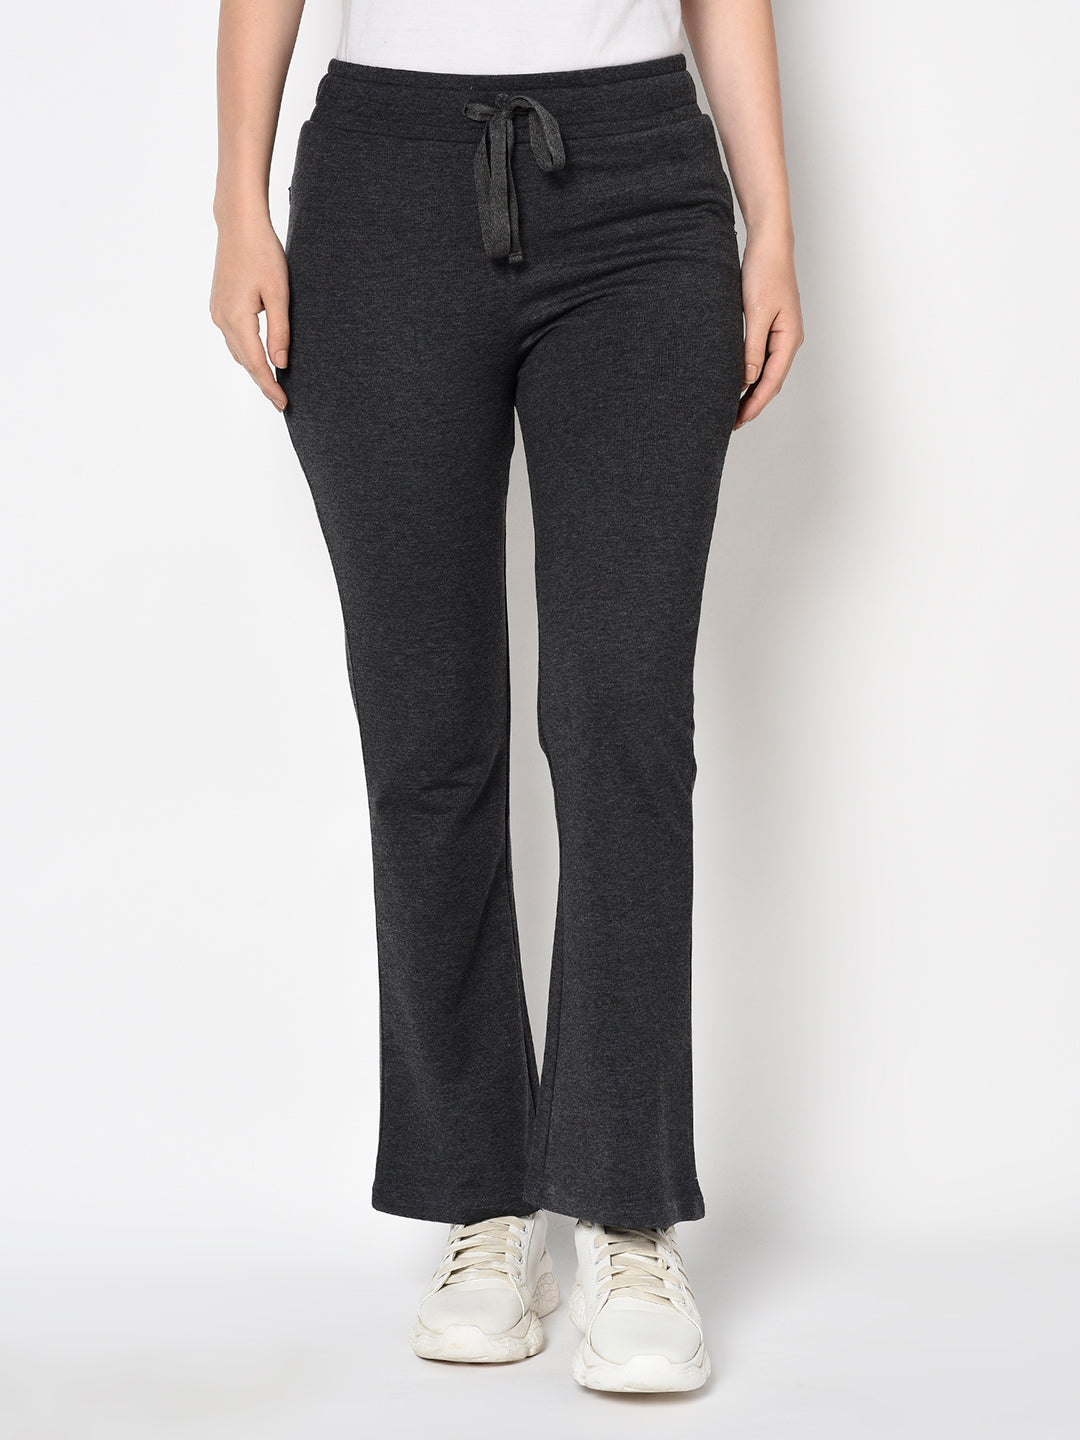 Grey Bell Bottomed Stretch Fabric Track Pant With Zipper Pockets